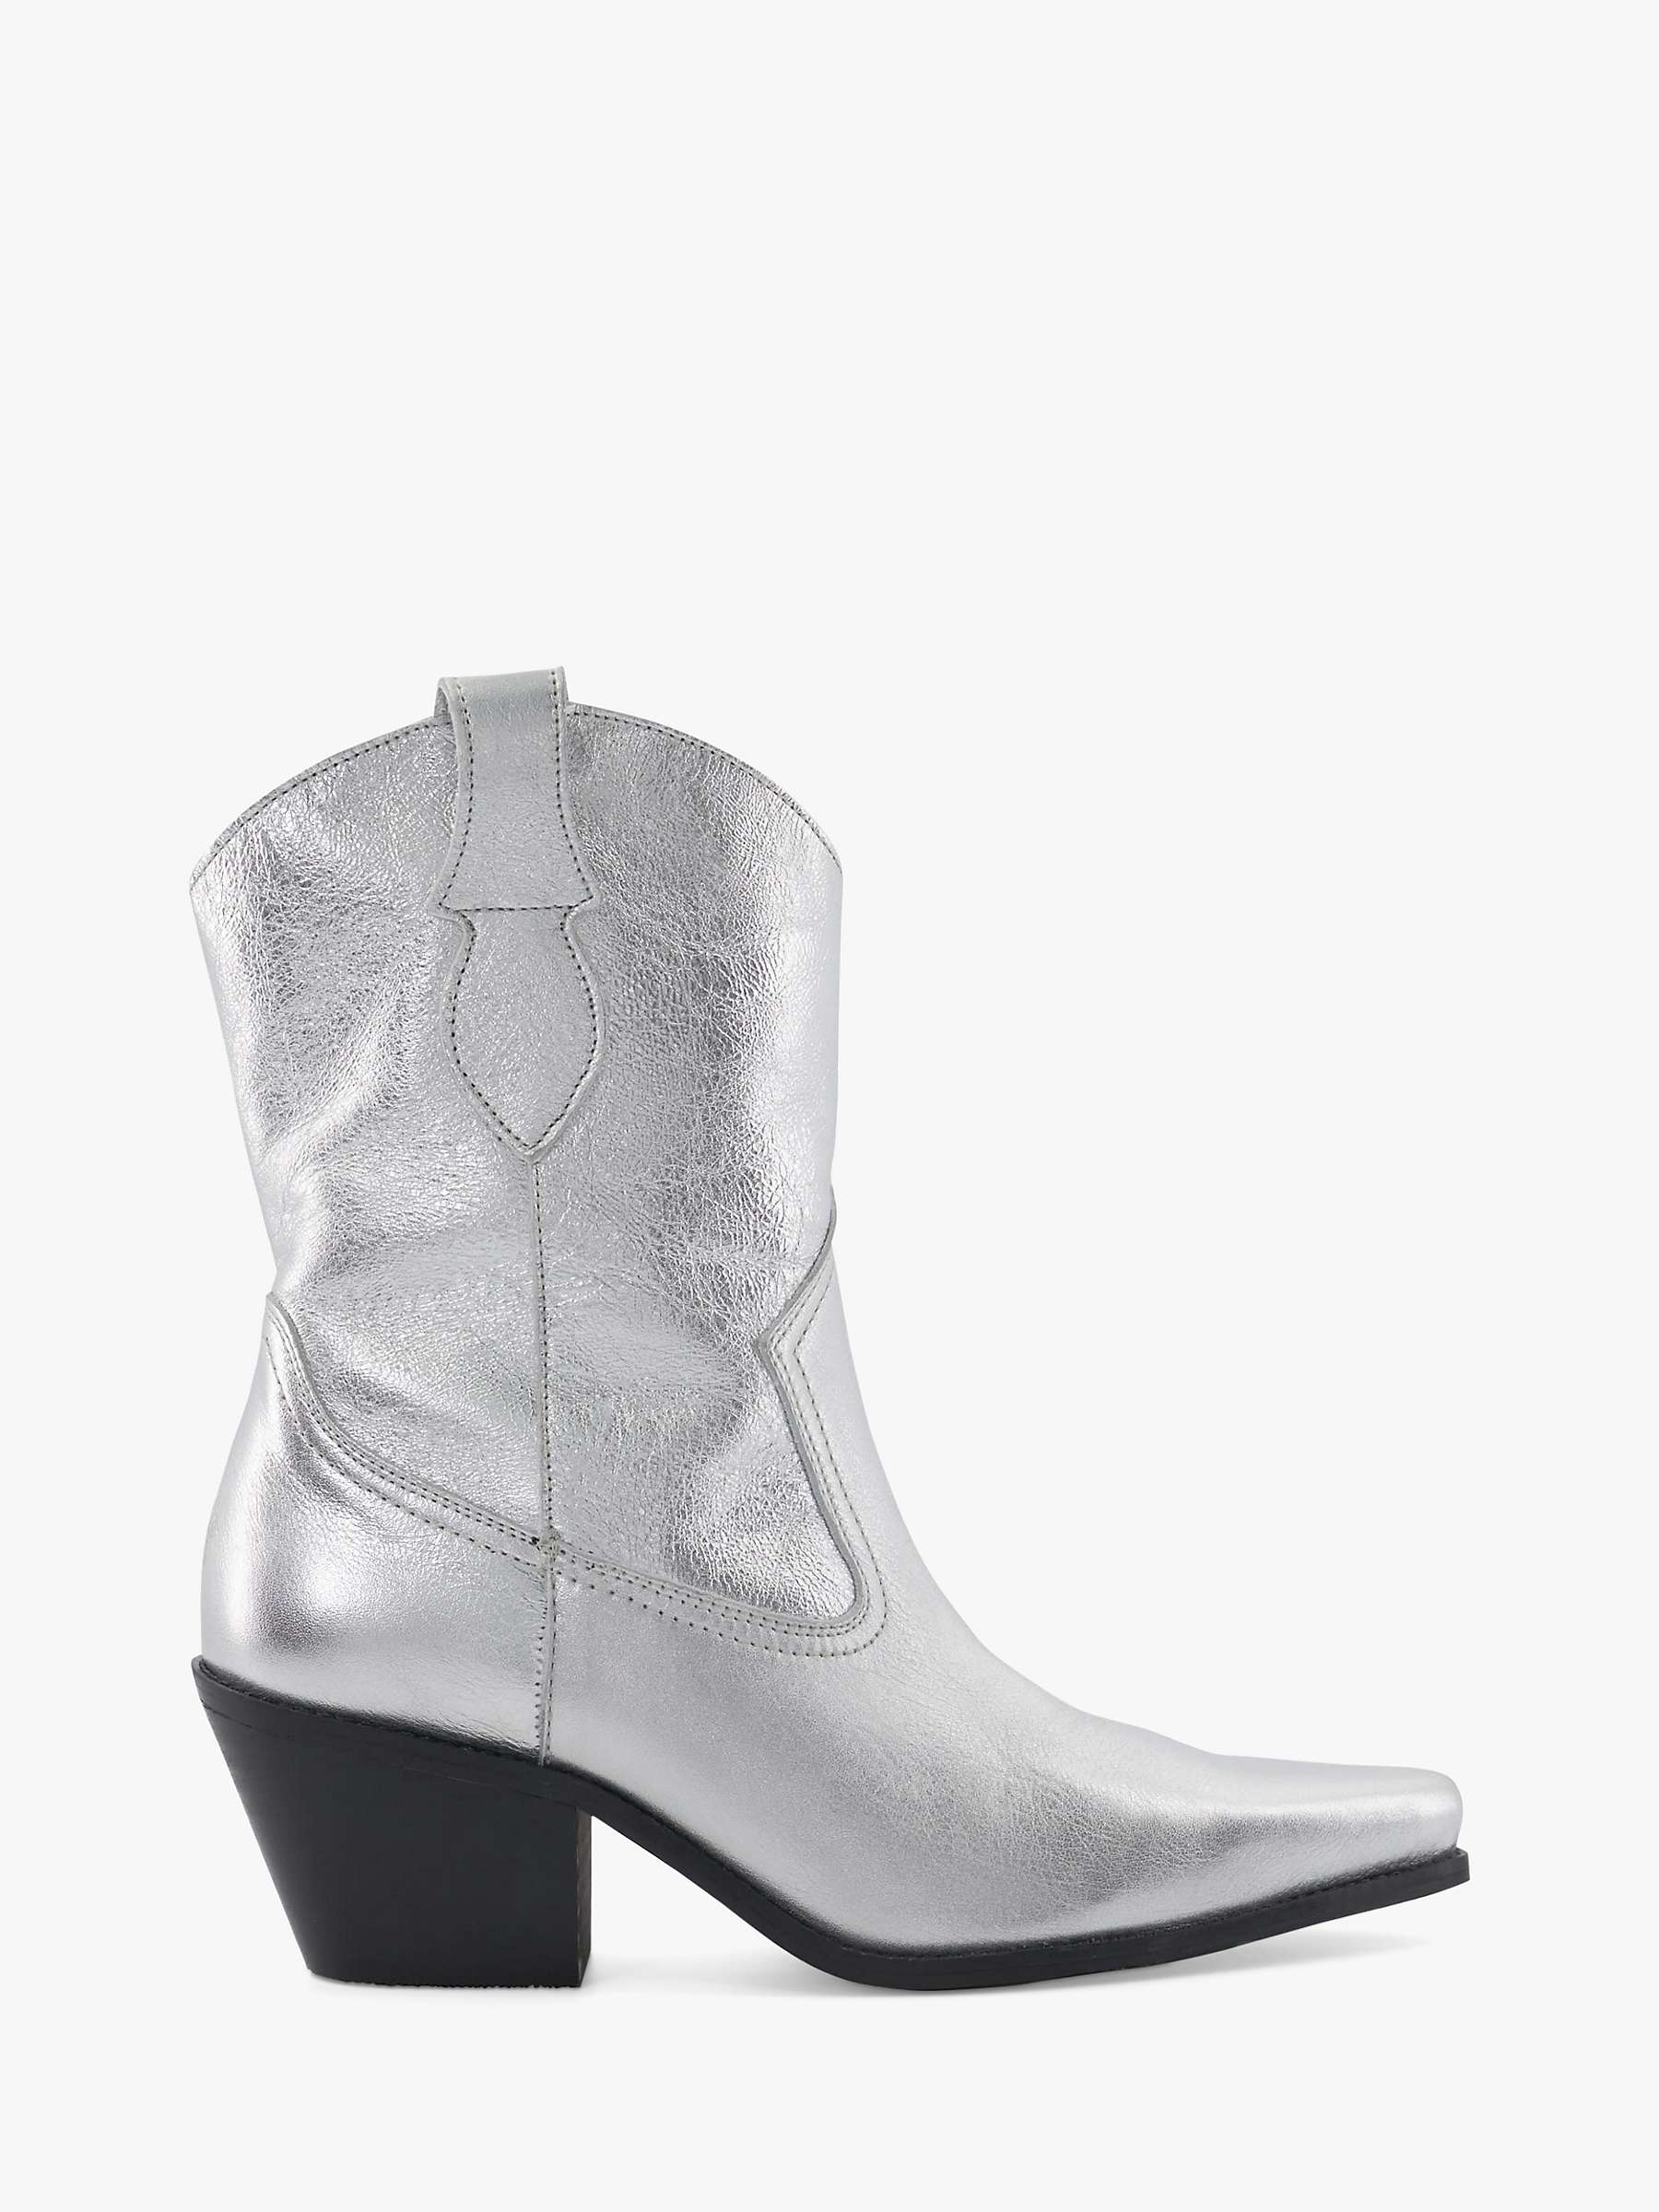 Dune Pardner Leather Cowboy Boots, Silver at John Lewis & Partners